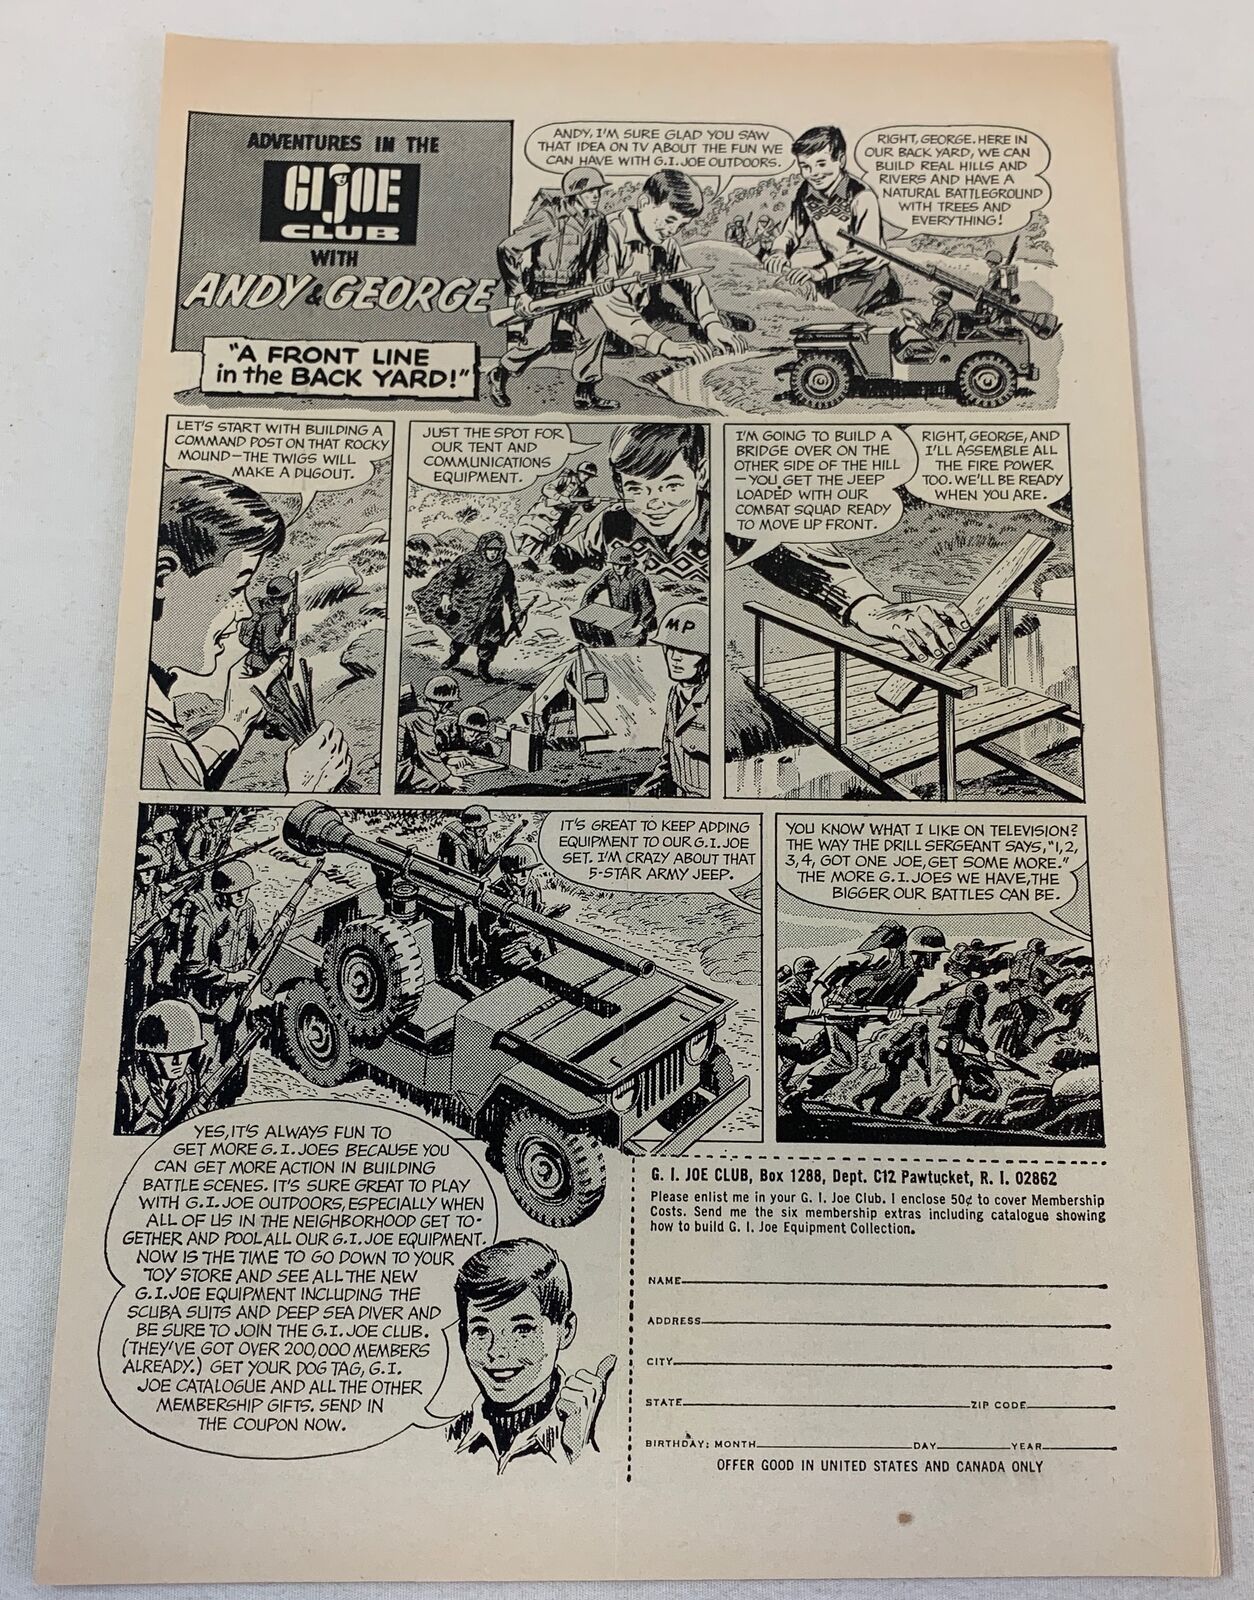 1966 GI JOE ad page ~ Andy & George Front Line In The Back Yard ~ 5-Star Jeep